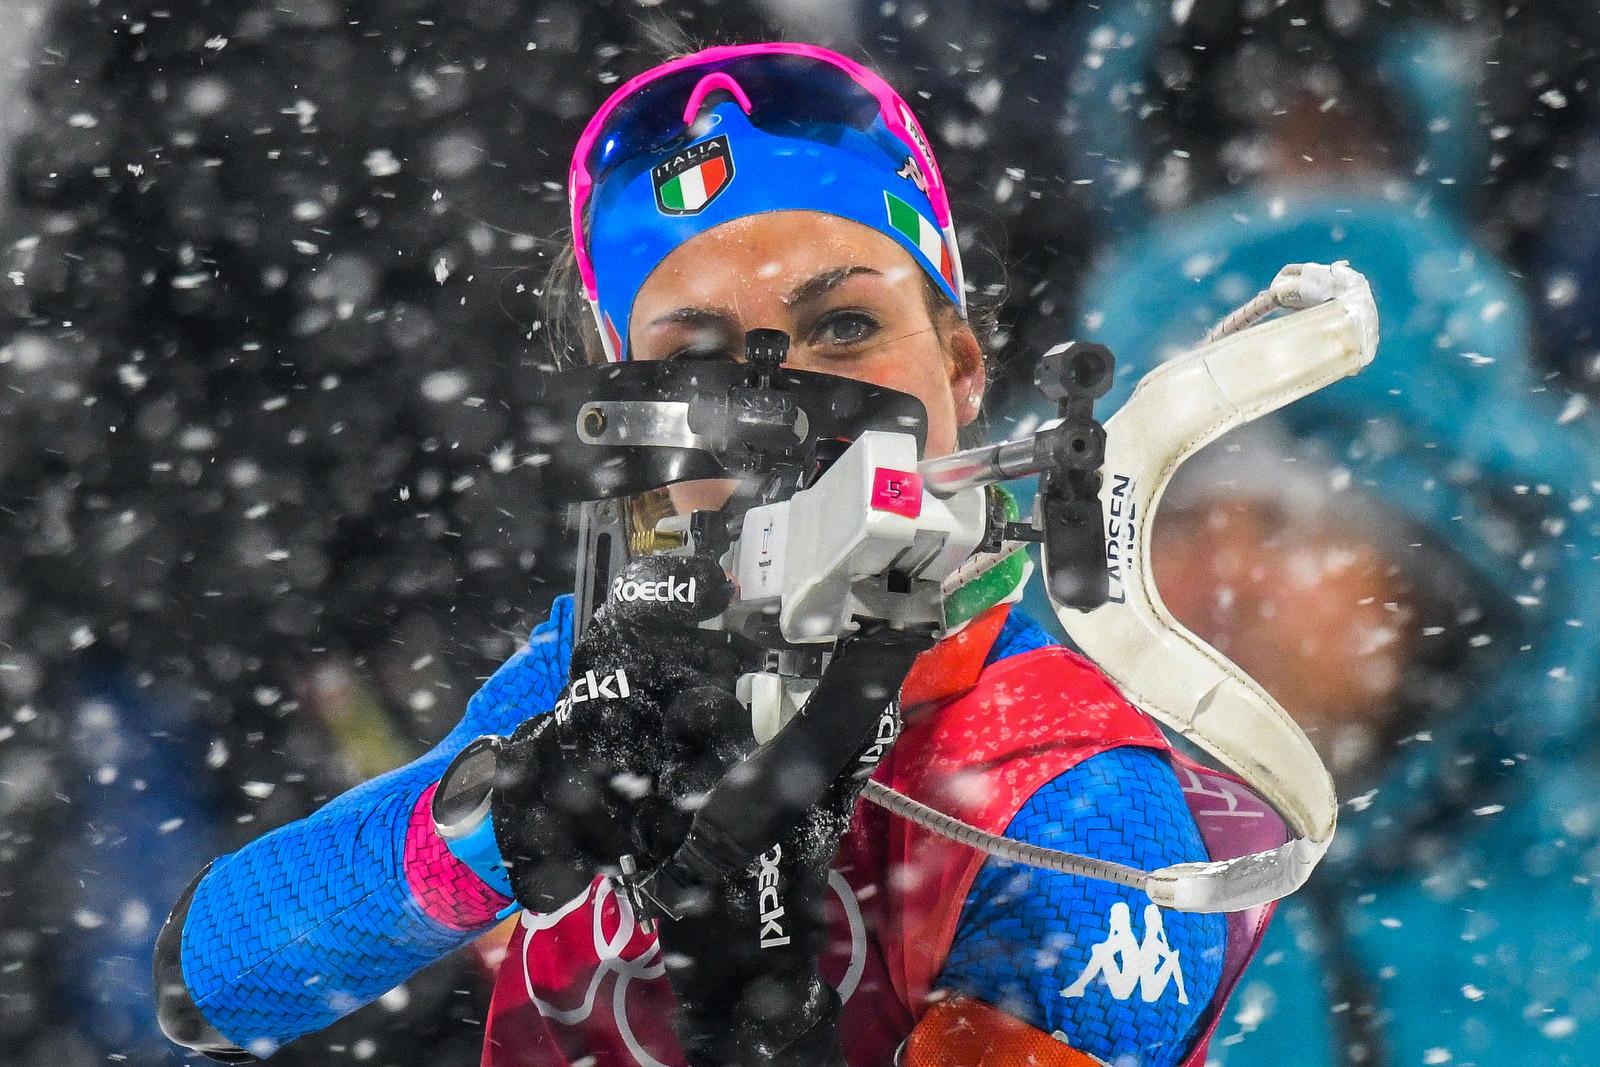 The best photo of the 2018 Winter Olympics